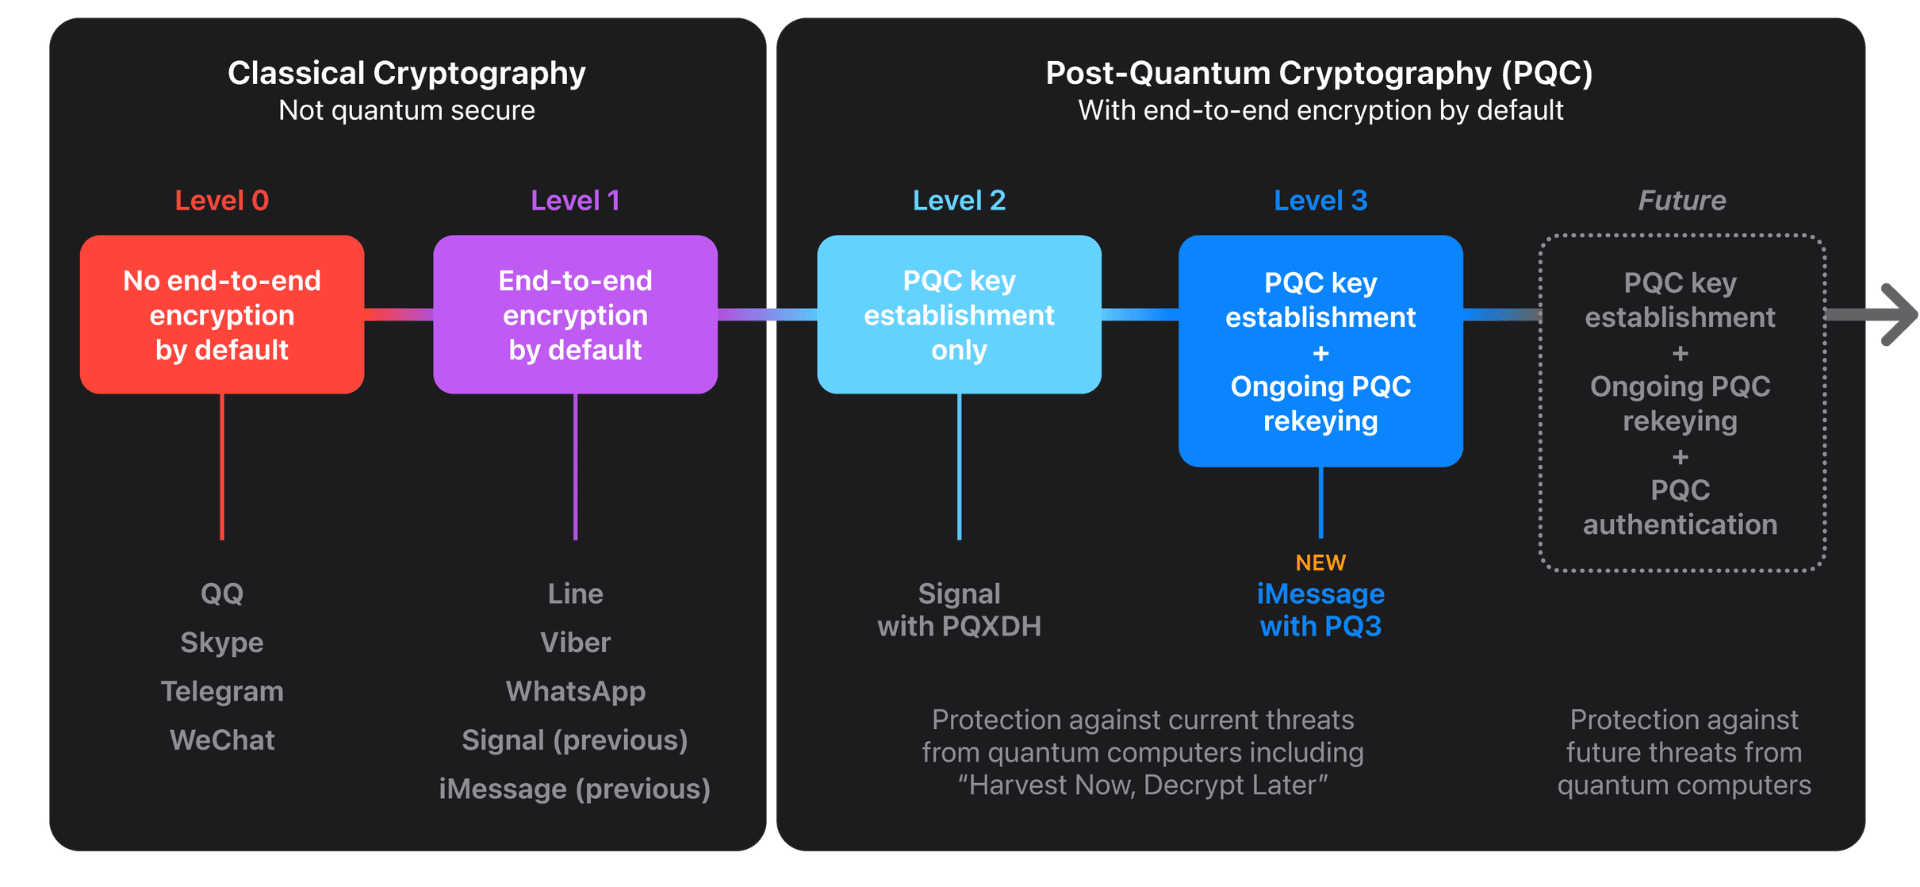 iOS 17.4 strengthens iMessage security with the new PQ3 protocol to thwart quantum computers from the future